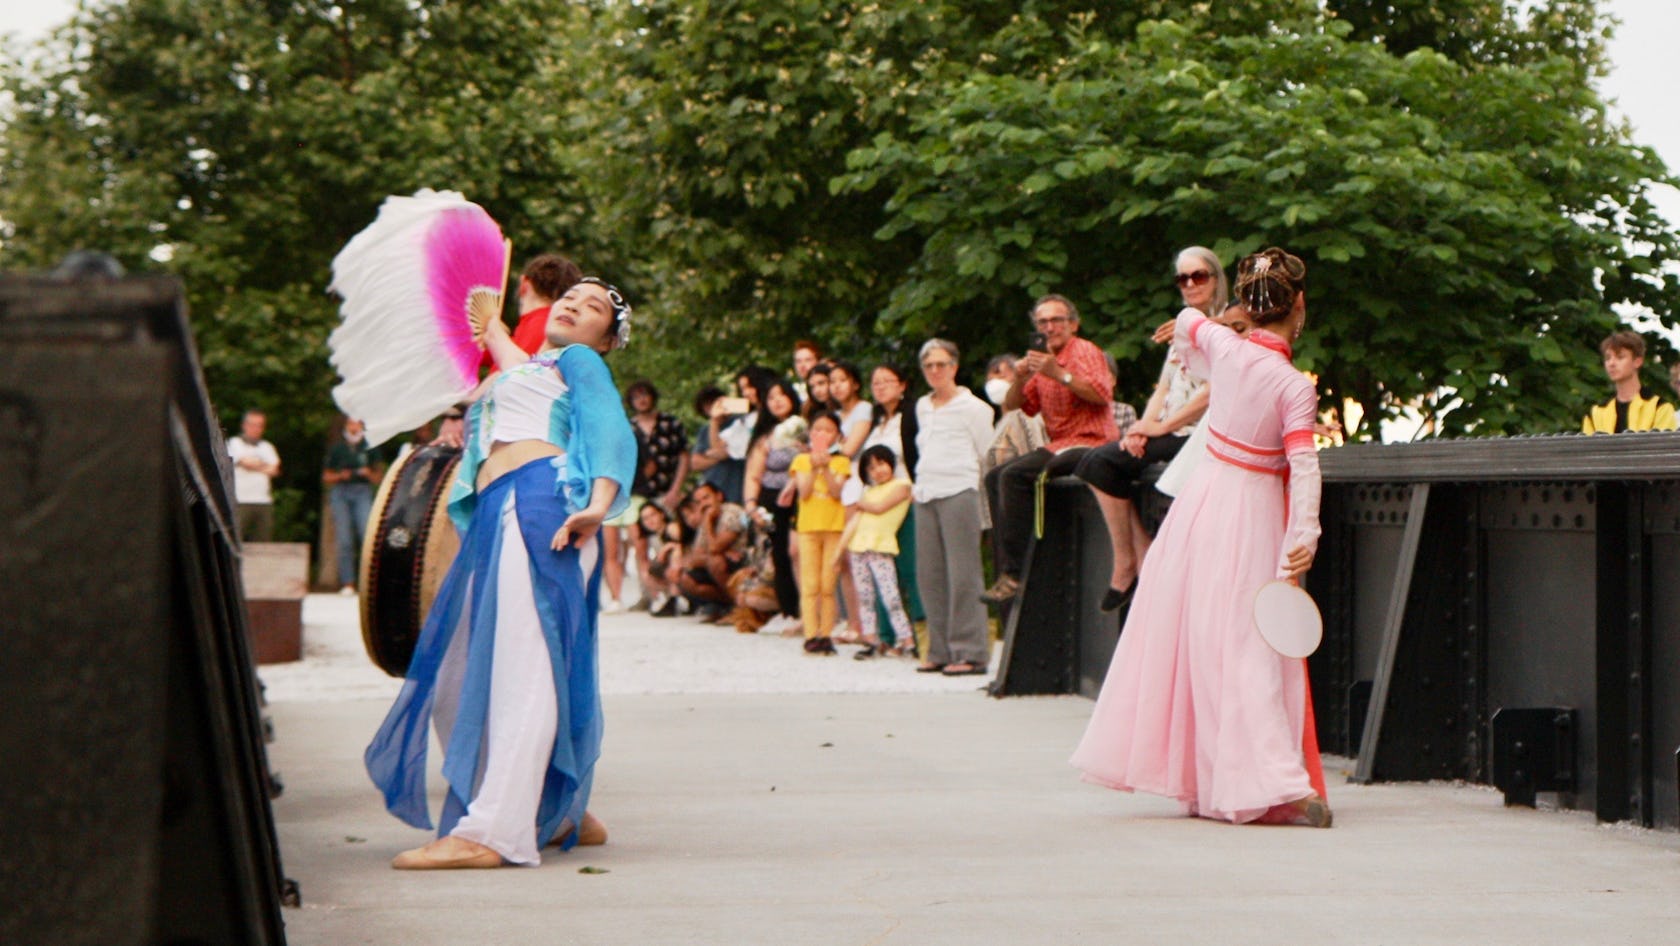 Three performers, one wearing a pink and red dress and the other wearing a blue and white dress, and the other playing a drum, dance towards a crowd of people across a train bridge at the Rail Park.